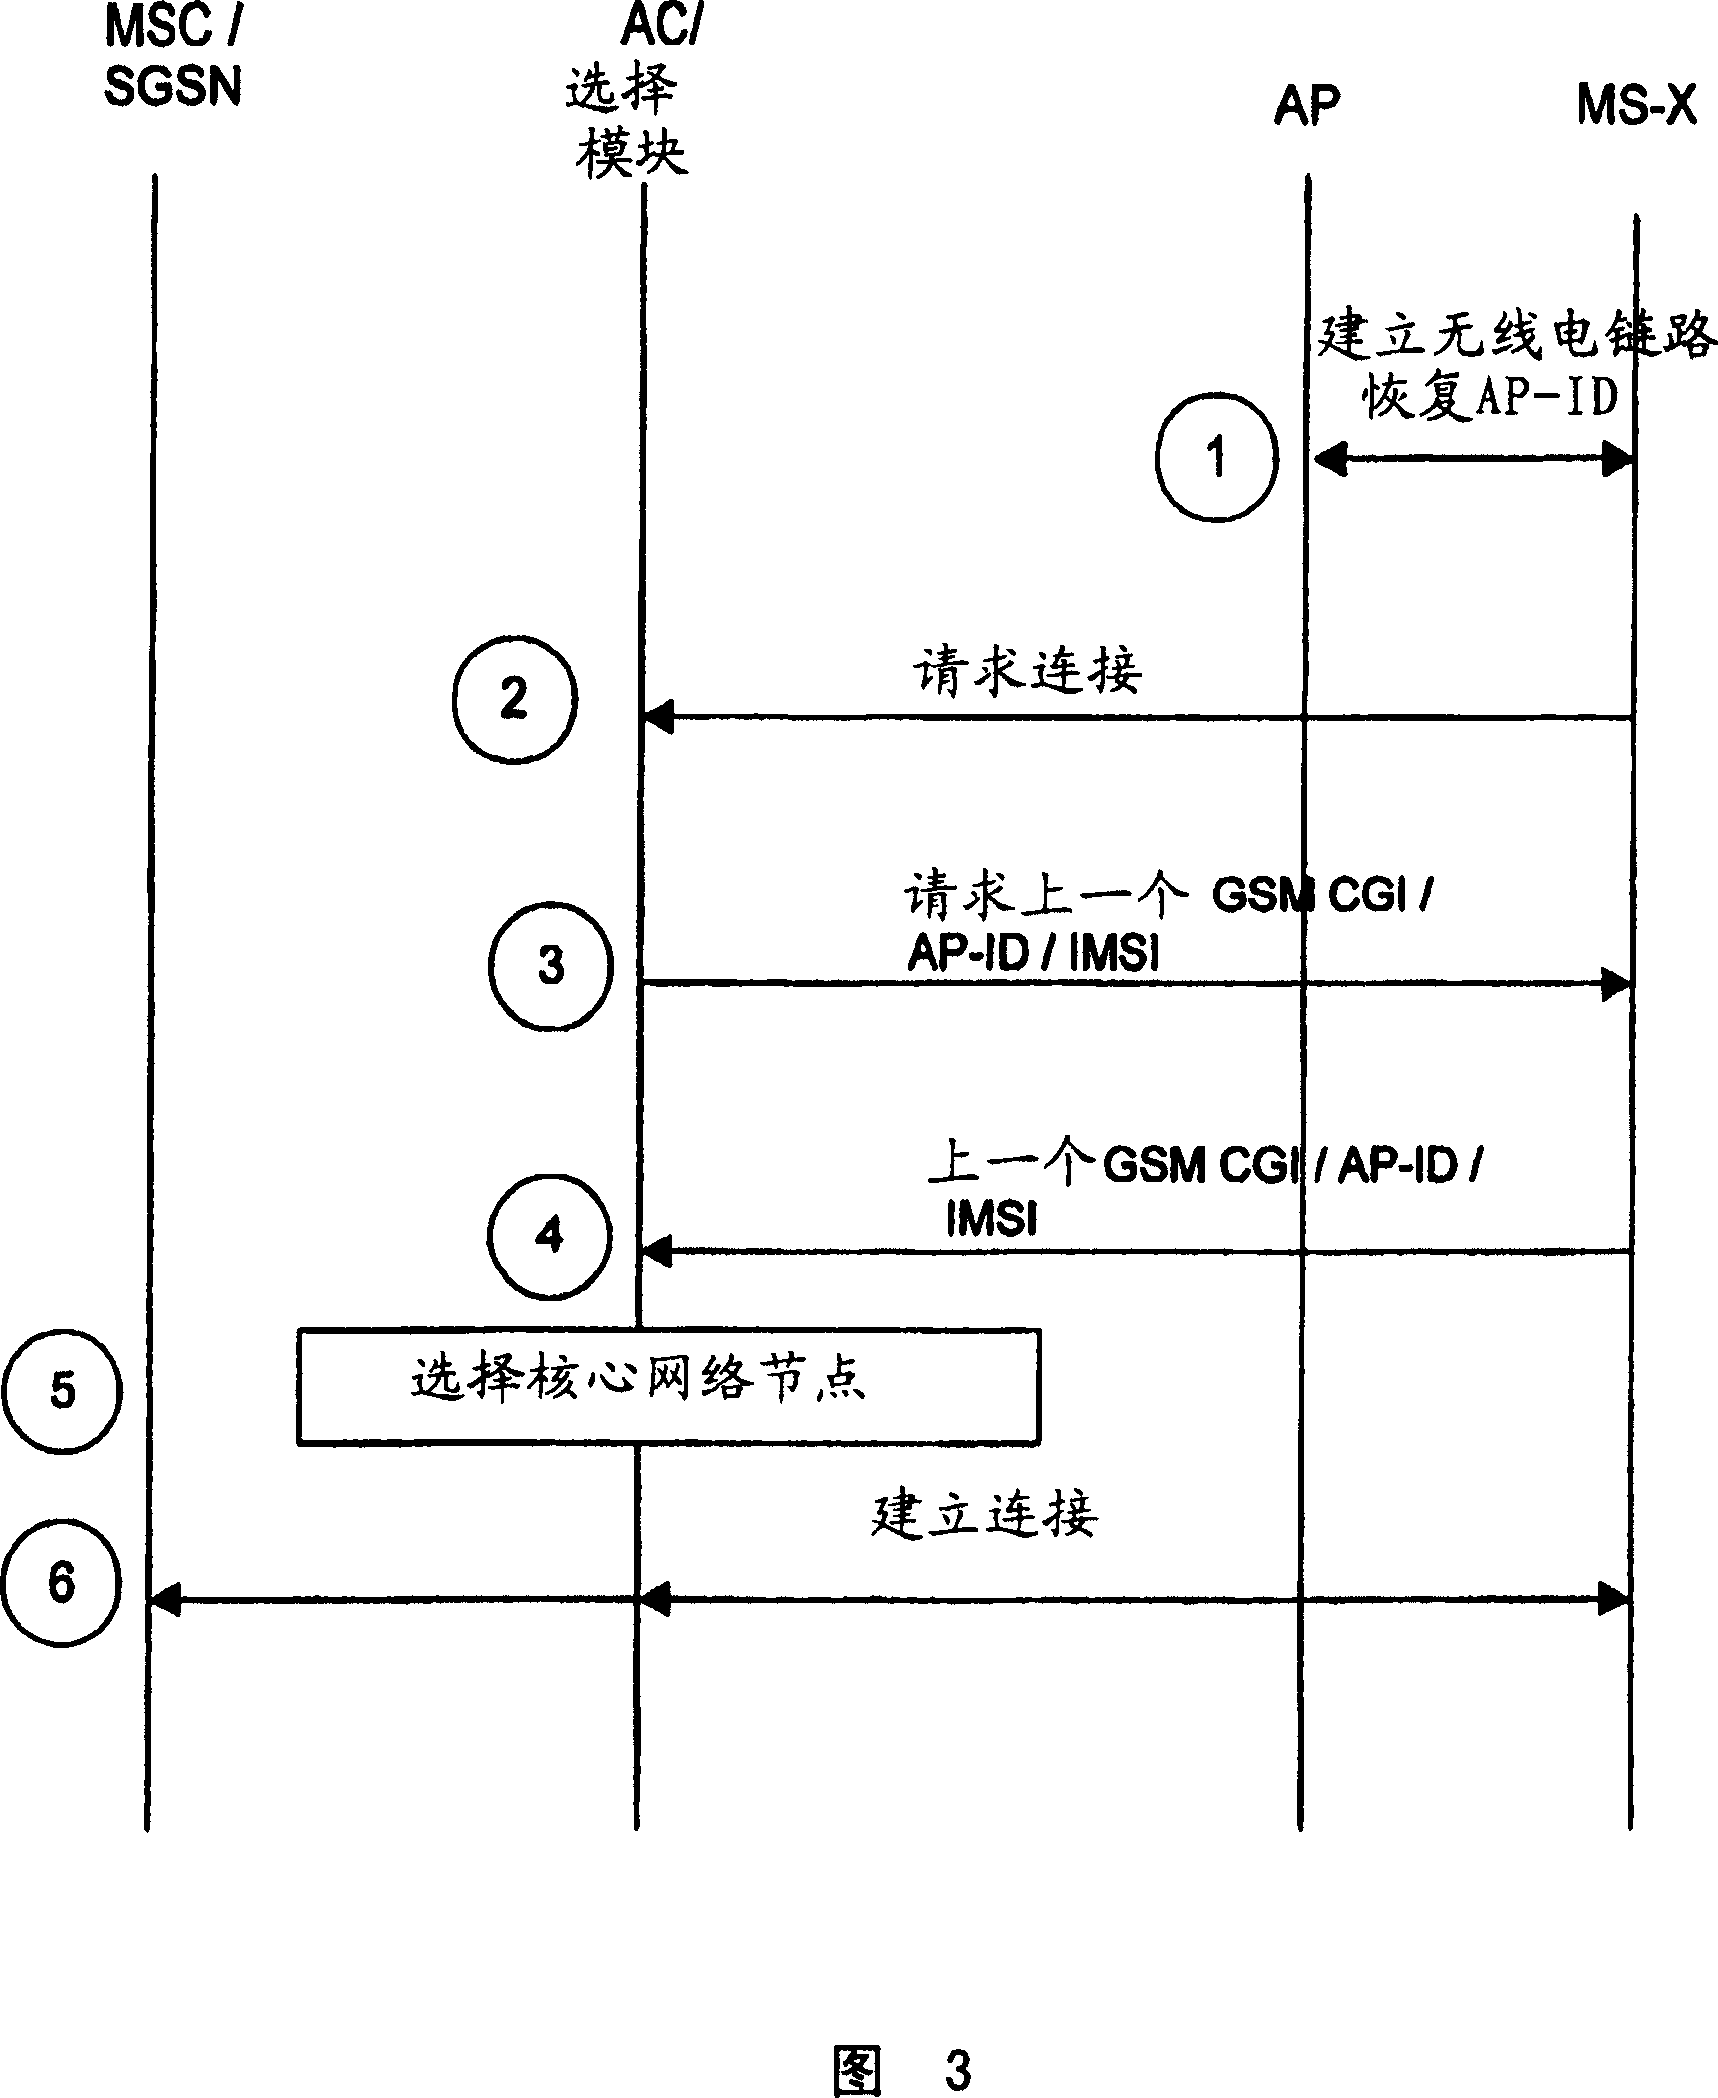 System for allocating mobile stations to a core network in an unlicensed radio access network